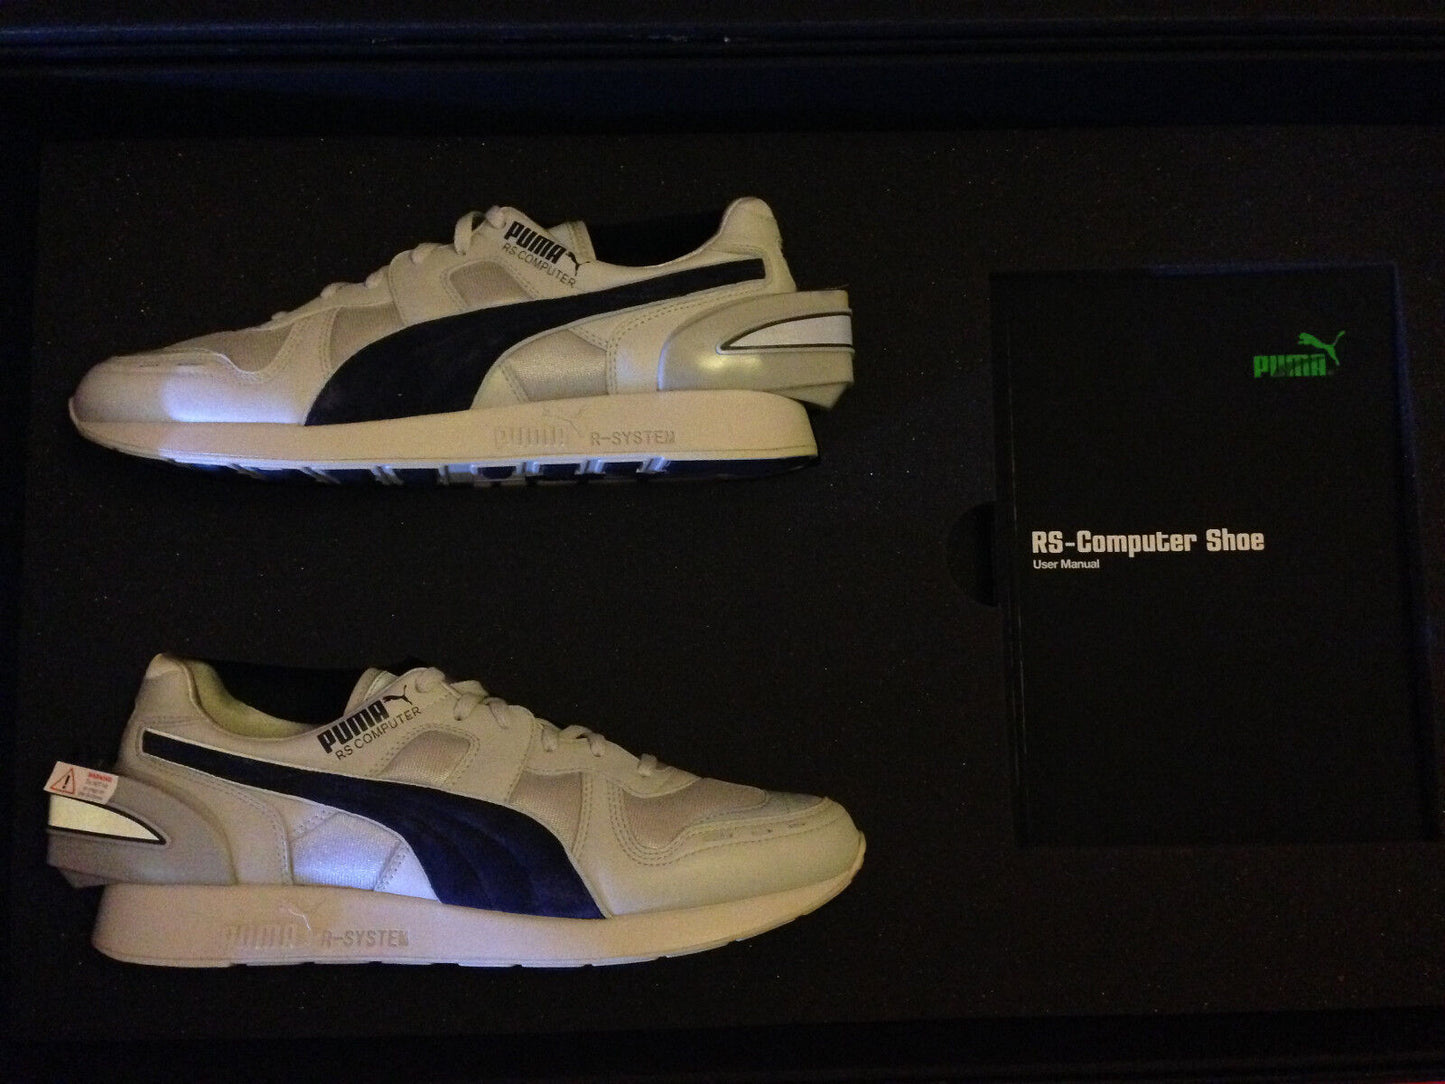 Puma RS Computer Shoe 1986-2018 #23 of 86 pairs worldwide new US 9 UK 8 EUR 42